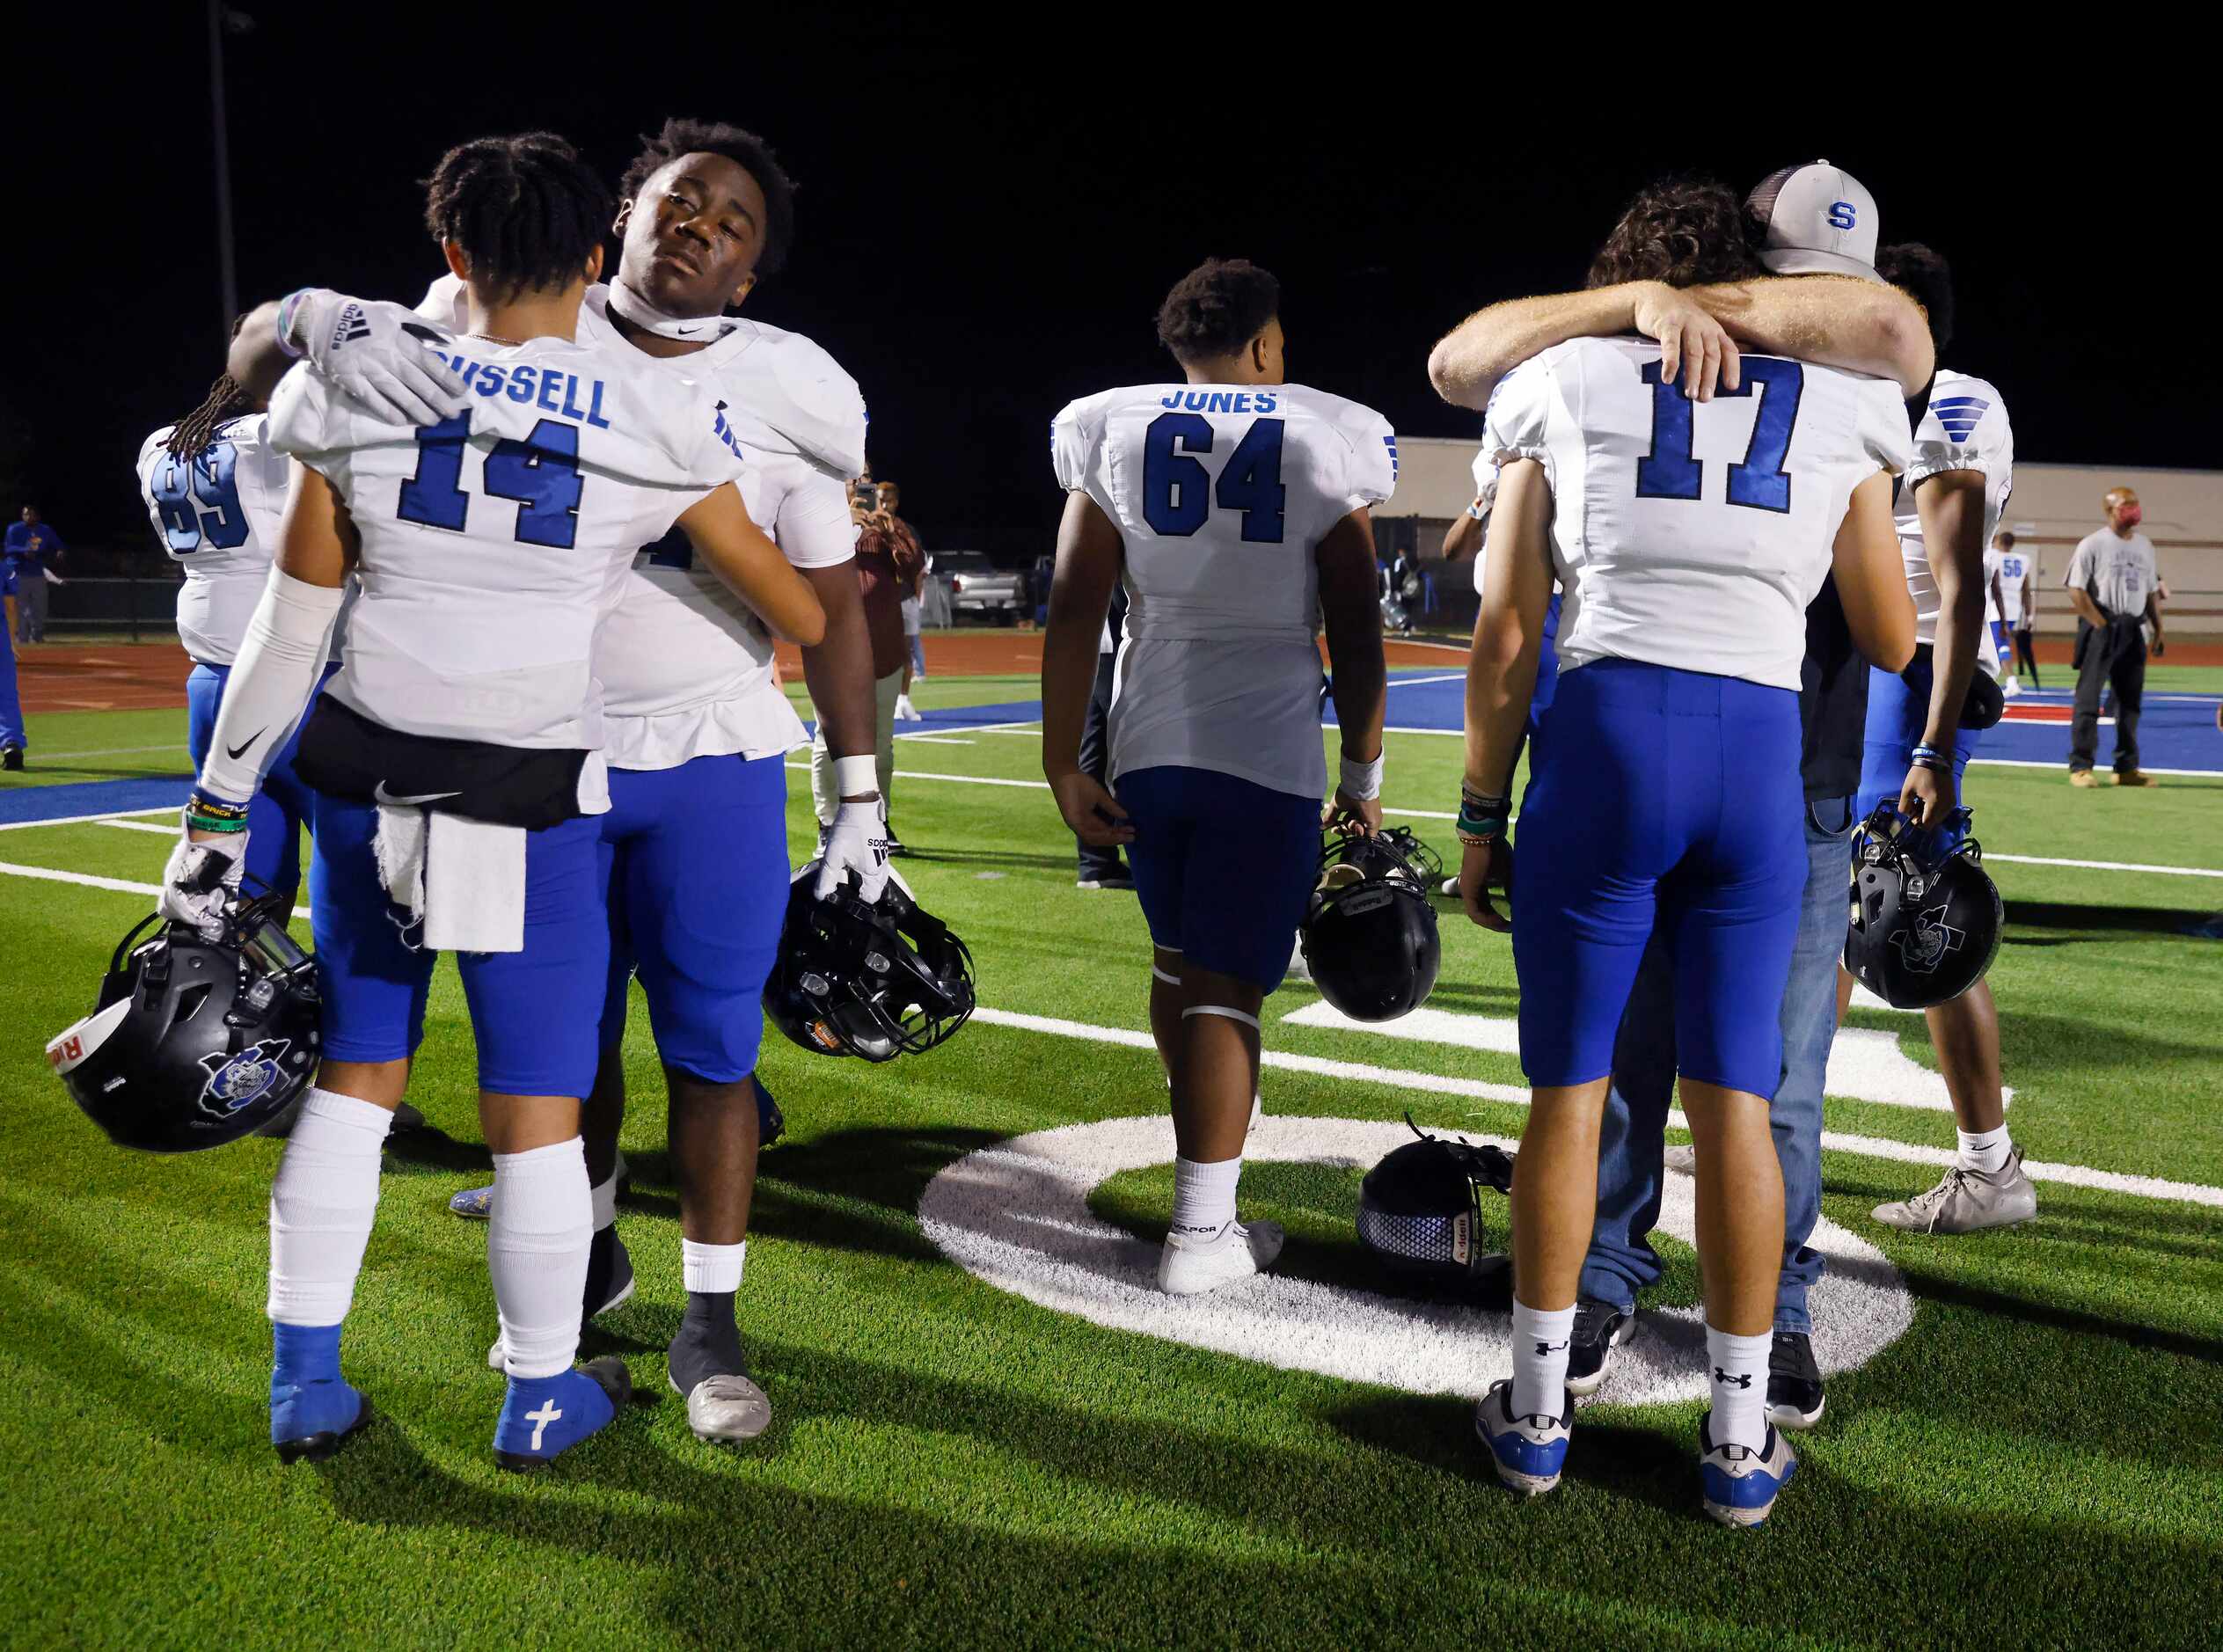 Mansfield Summit football players including Kobe Russell (14) receiving a hug from Andrew...